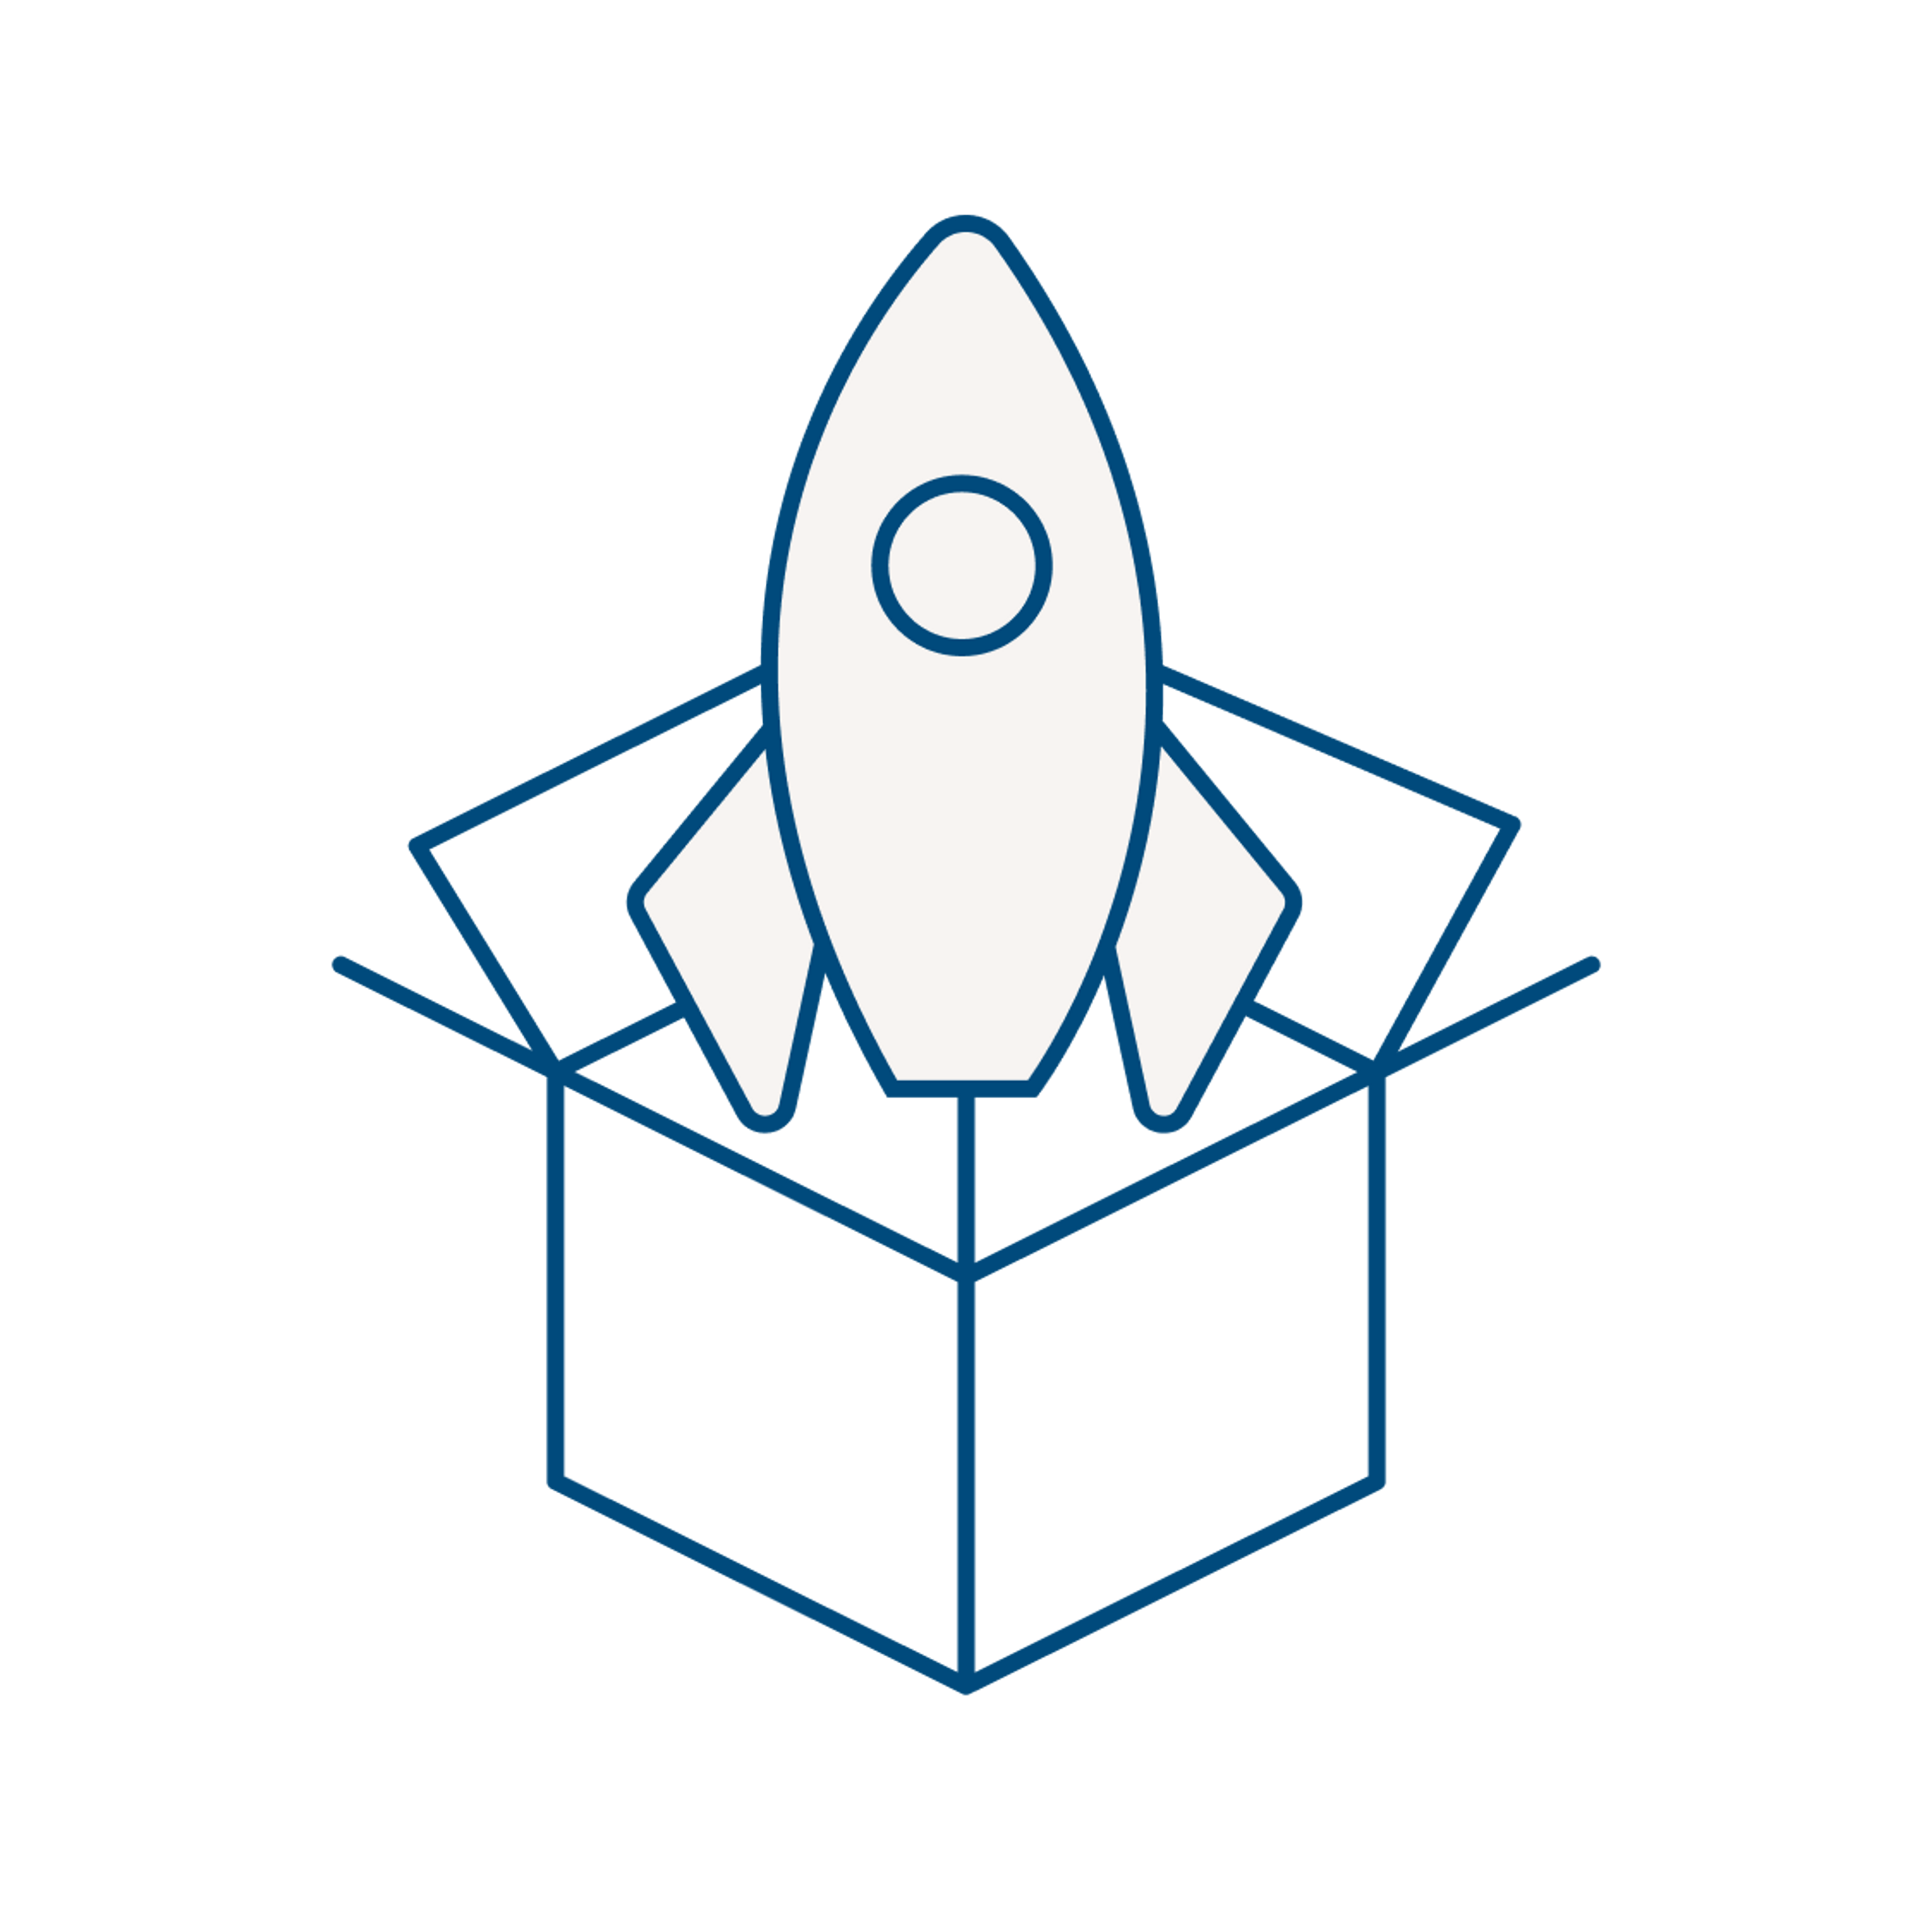 An icon depicting a rocket bursting out of a 3D box